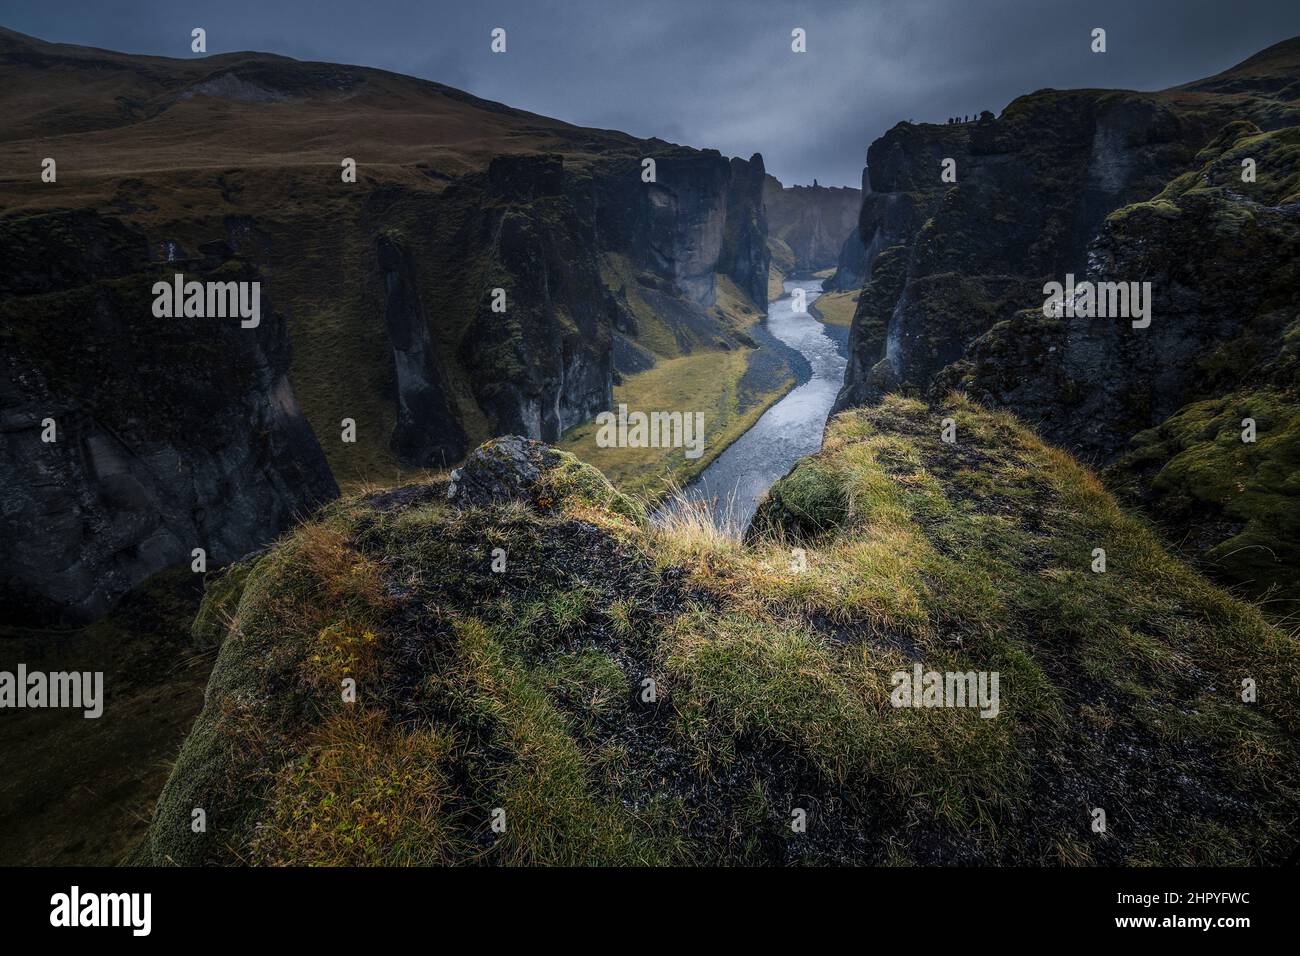 View of the Fjadrargljufur canyon in Iceland Stock Photo